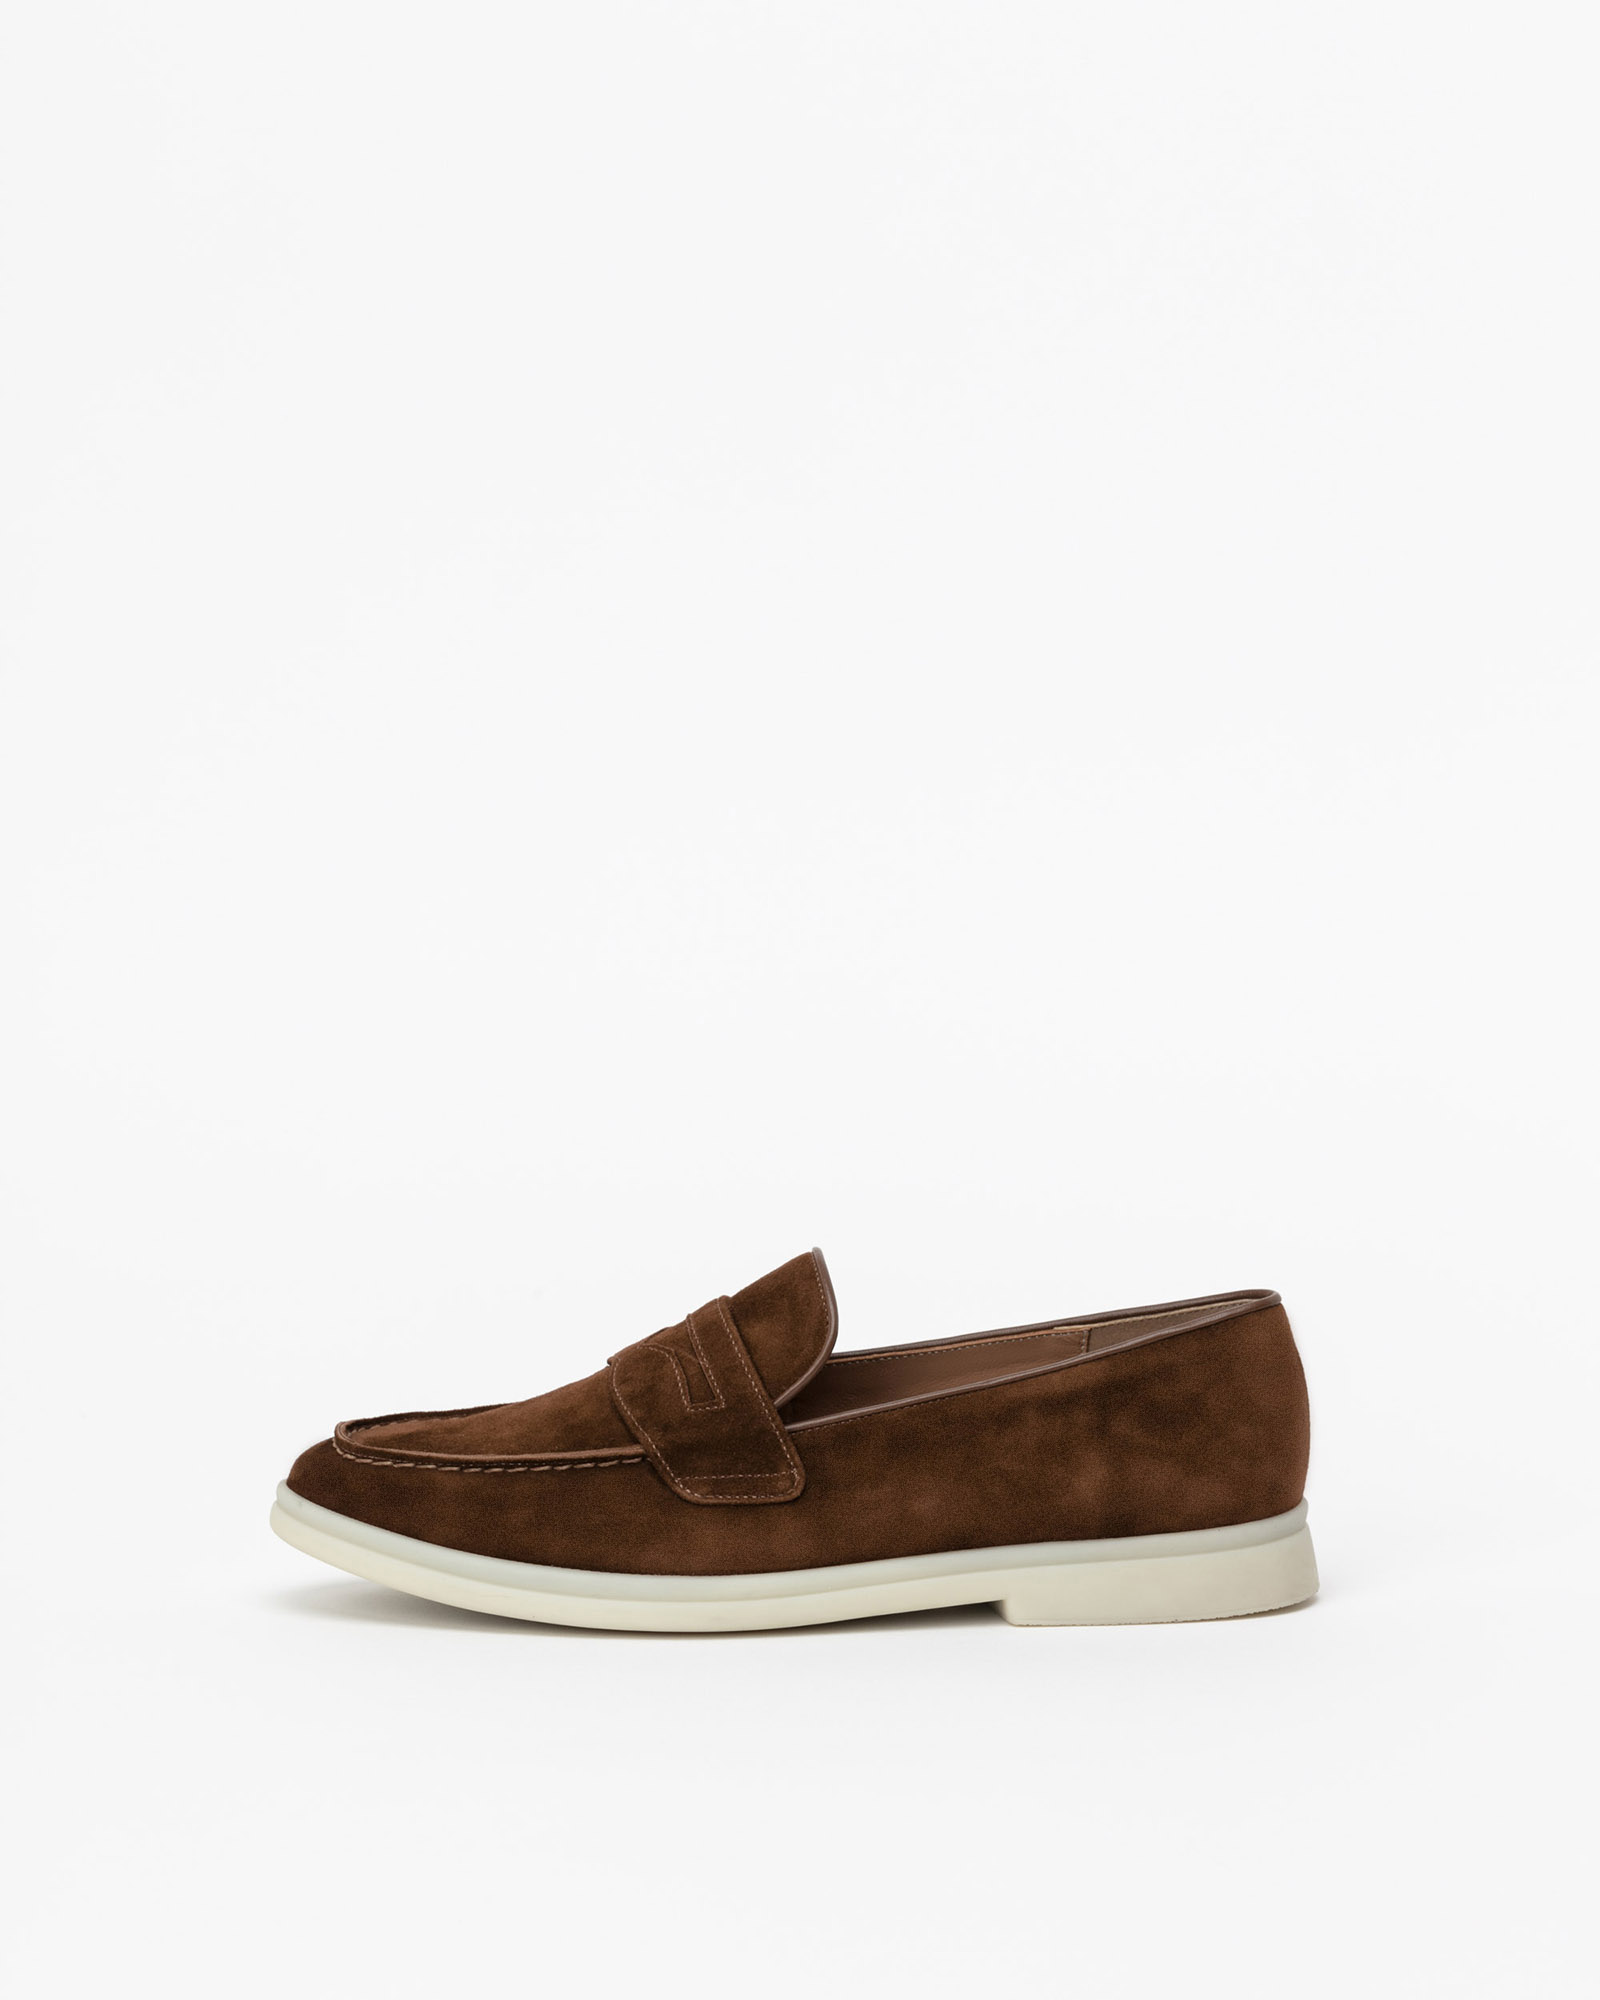 Sierra Stitched Loafers